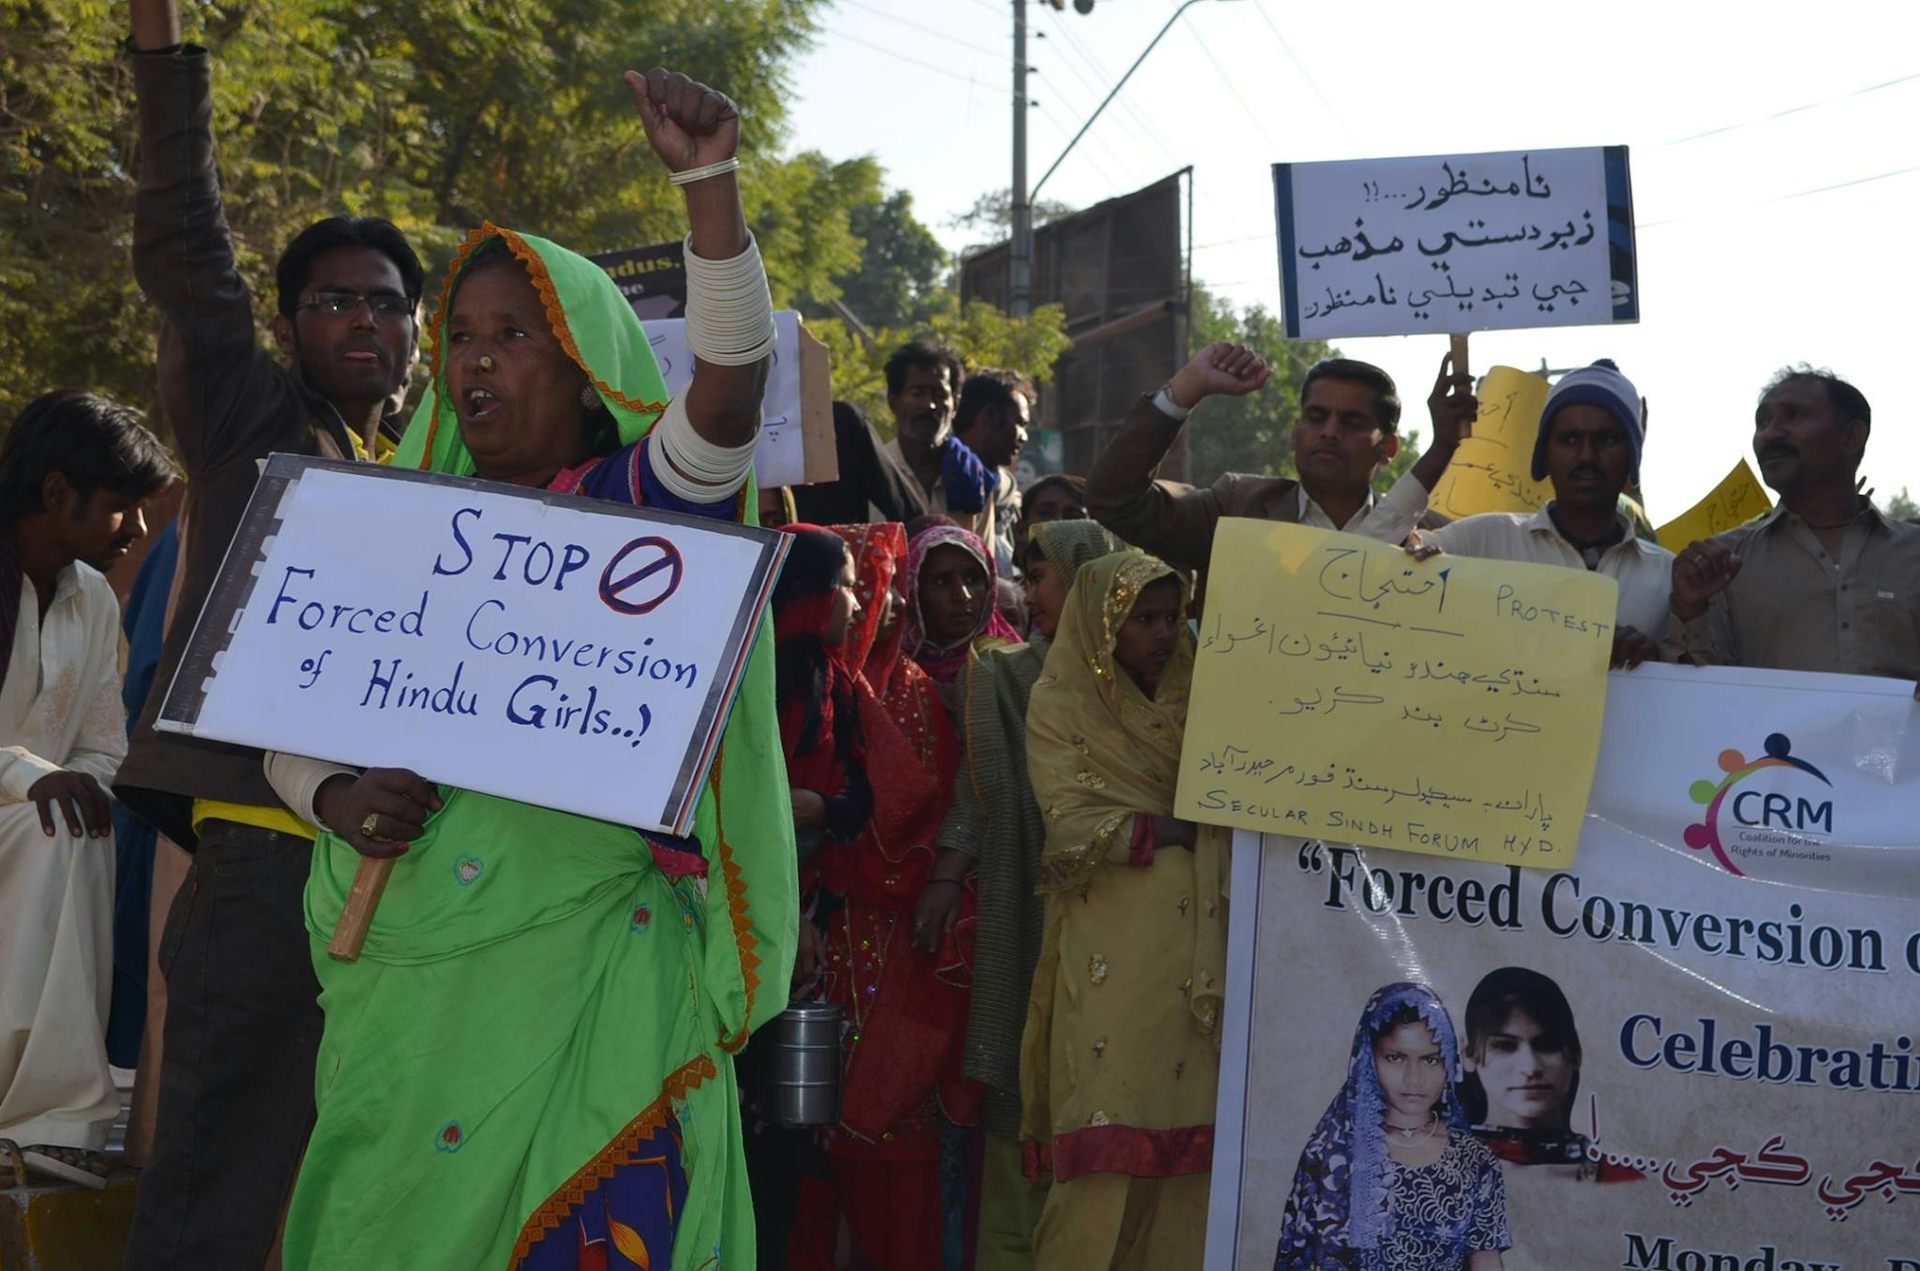 Forced conversions of Hindu women to Islam in Pakistan another perspective